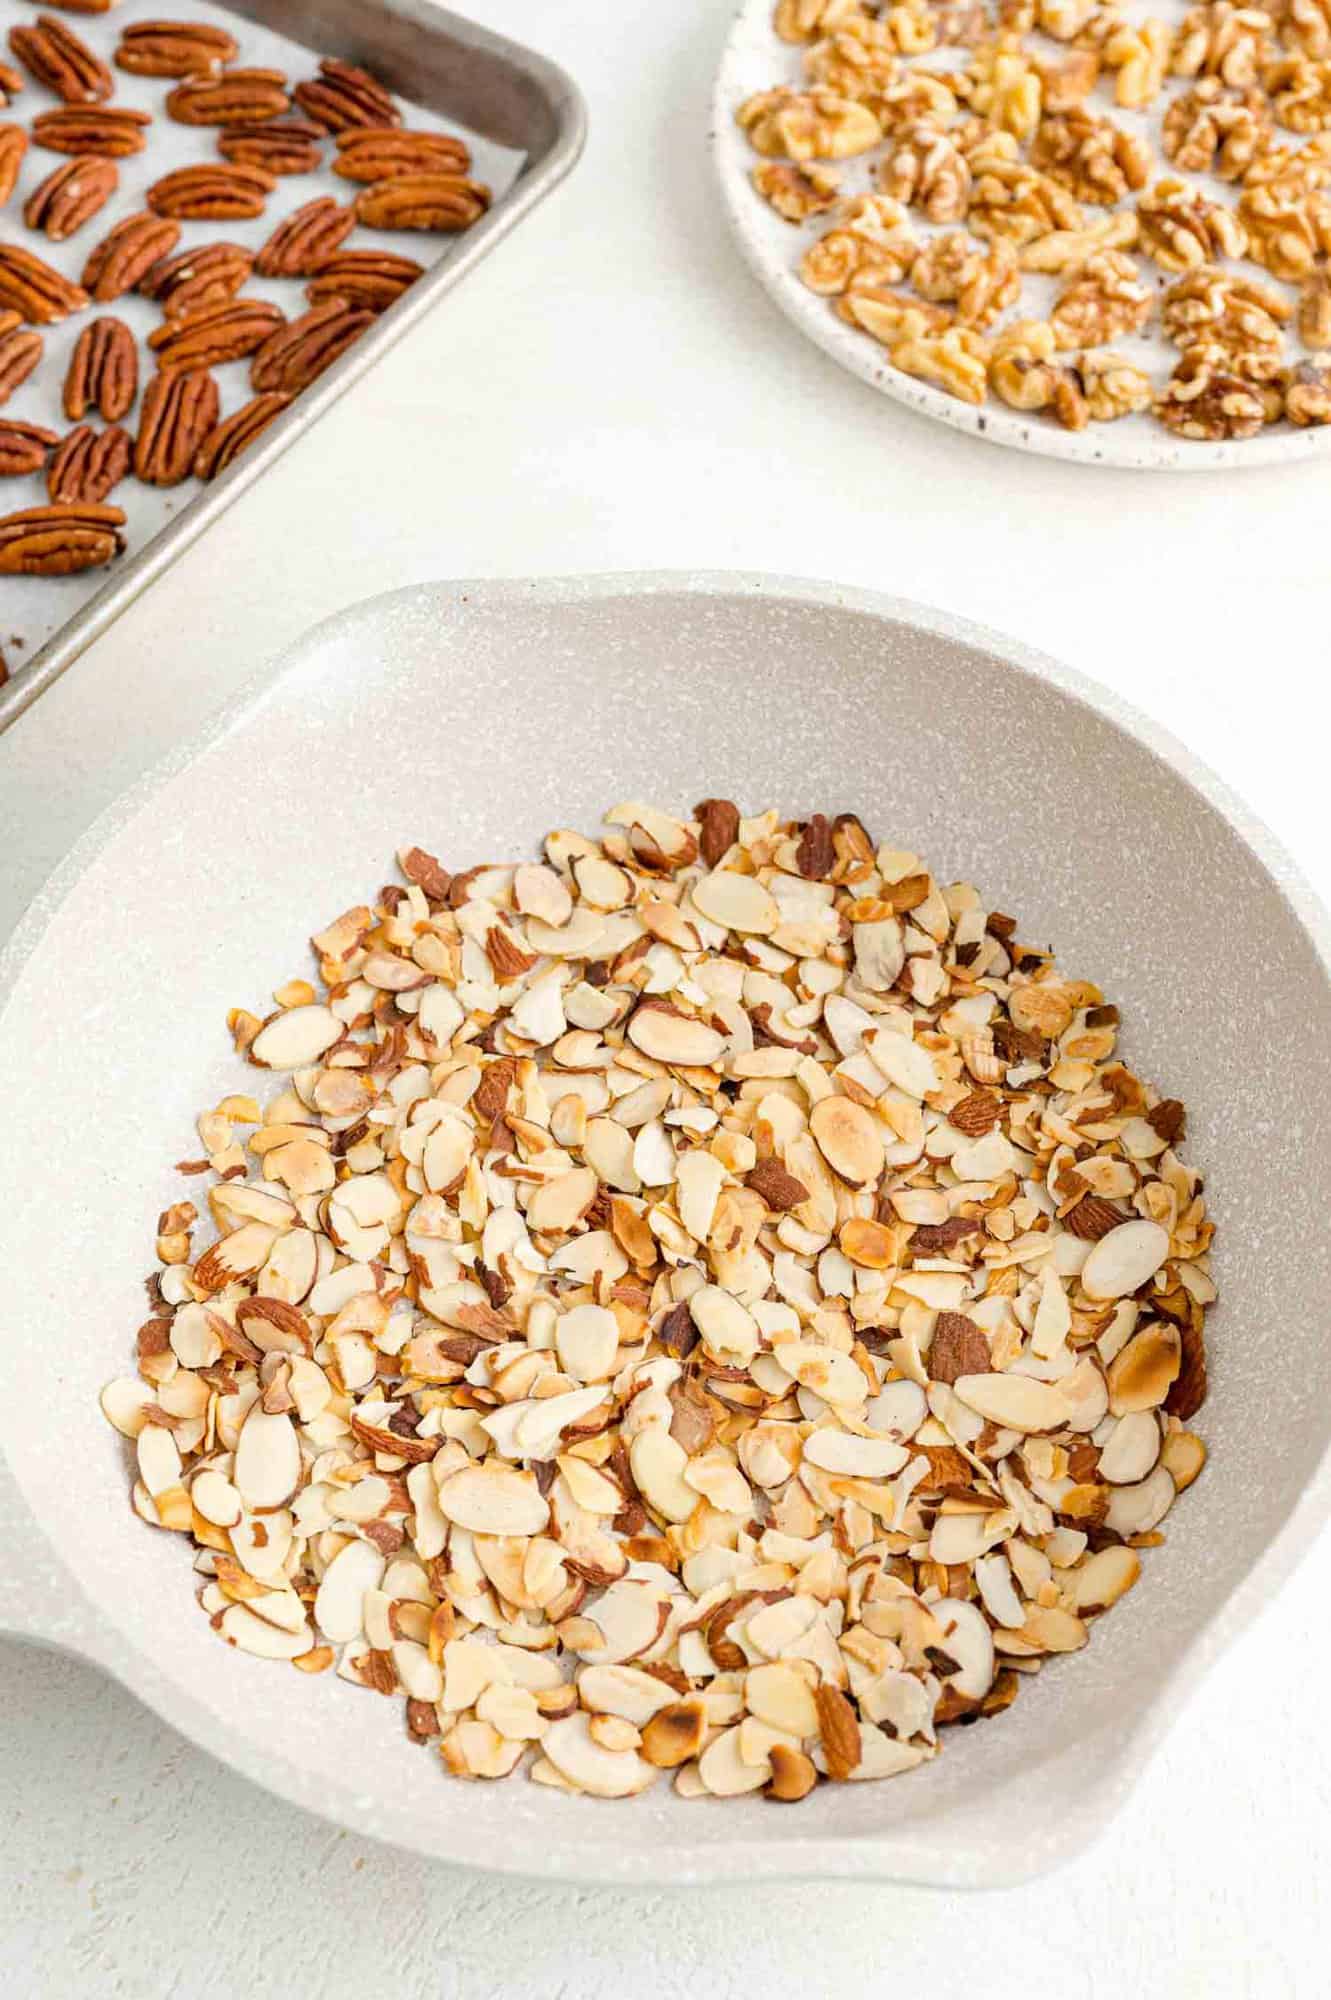 Toasted almonds in a white skillet next to a tray of toasted pecans and a plate of toasted walnuts.